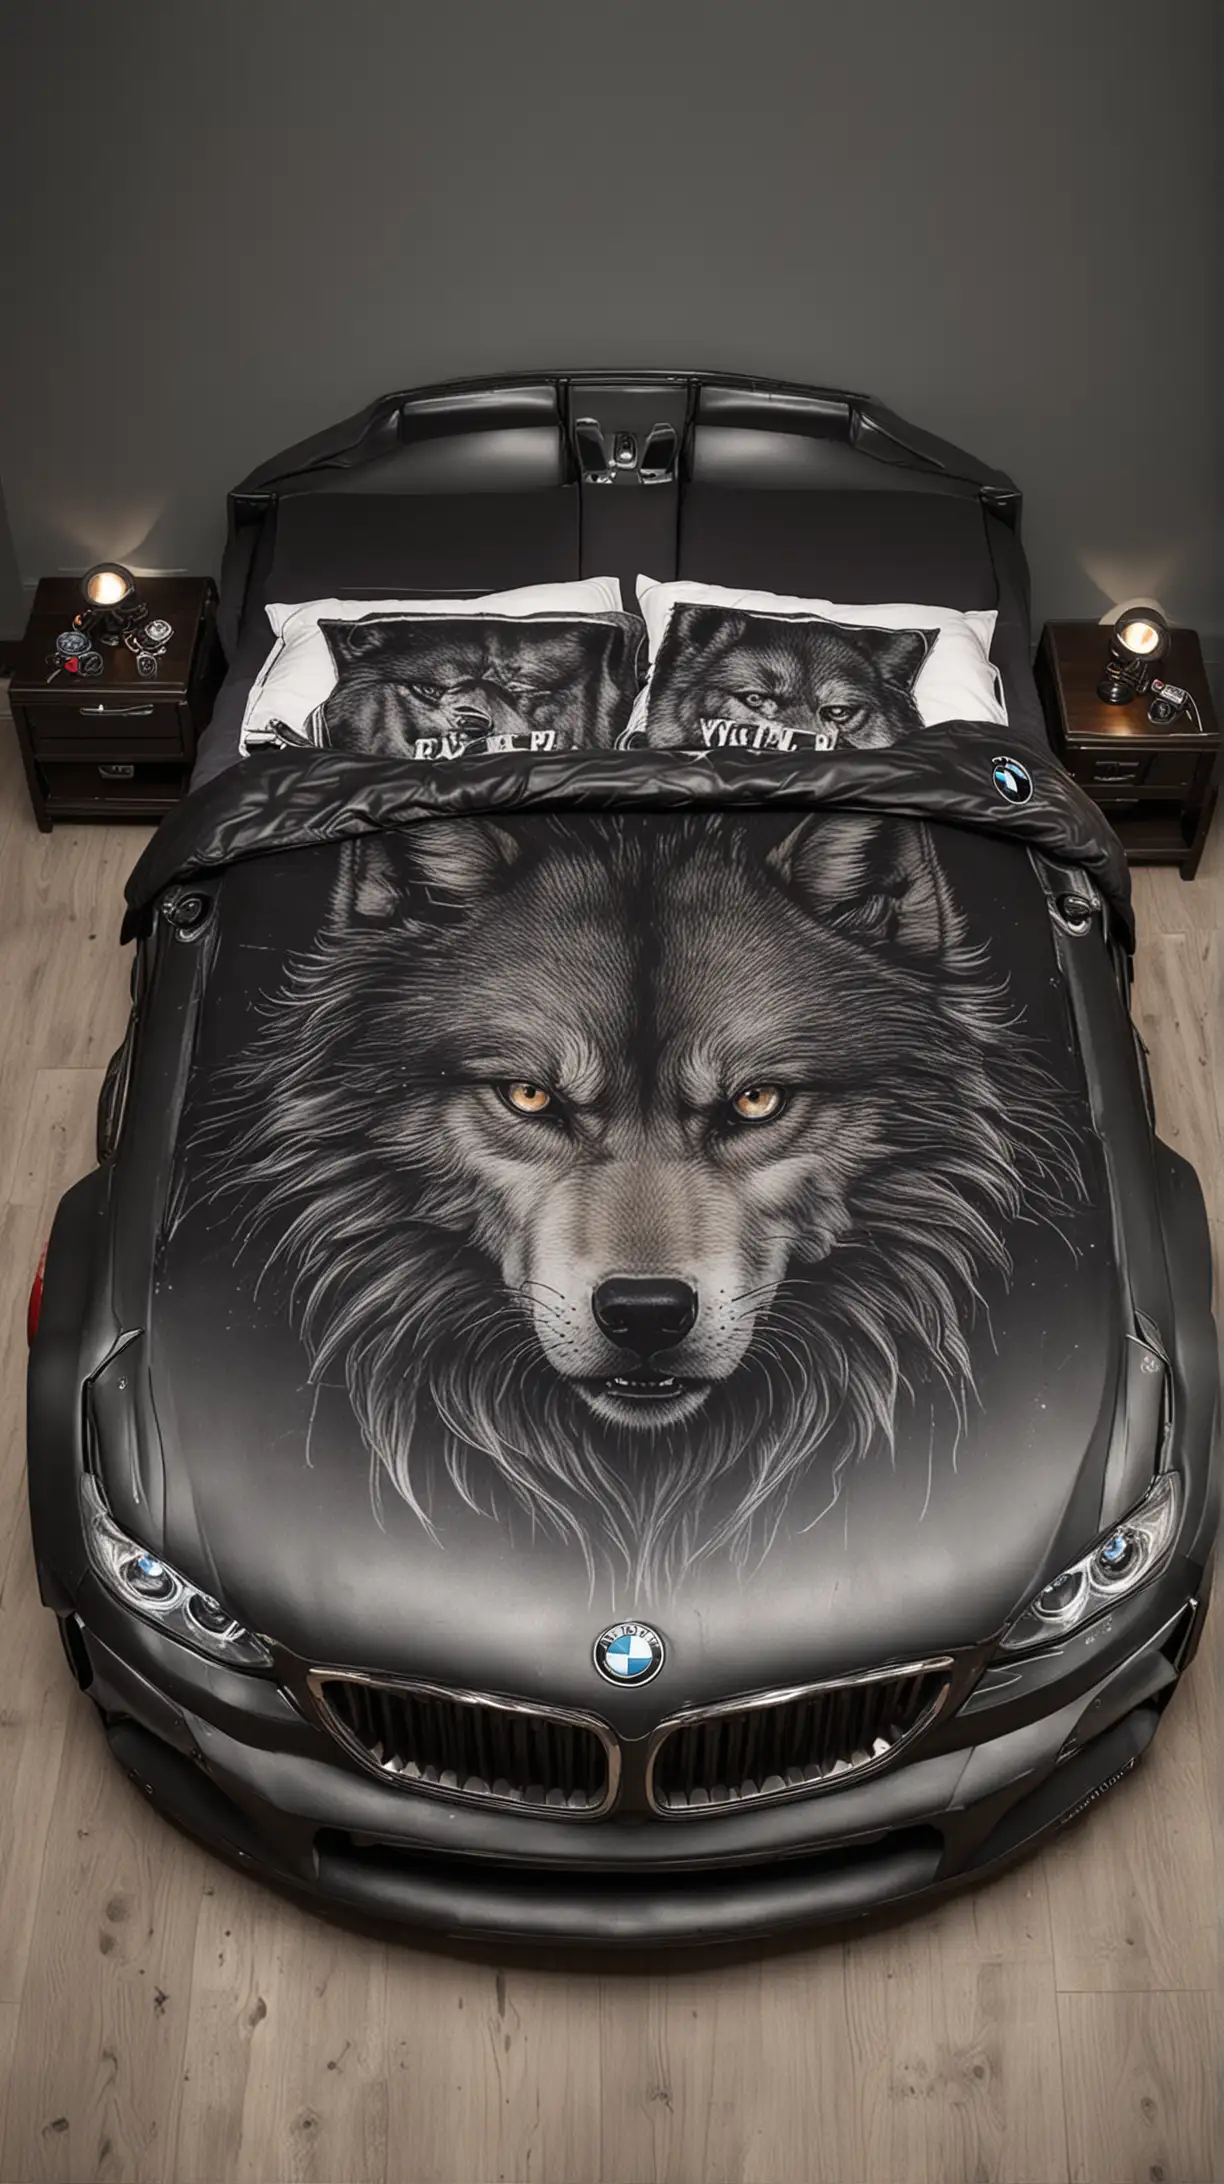 Double bed in the shape of a BMW car with headlights on and evil and good wolf graphics